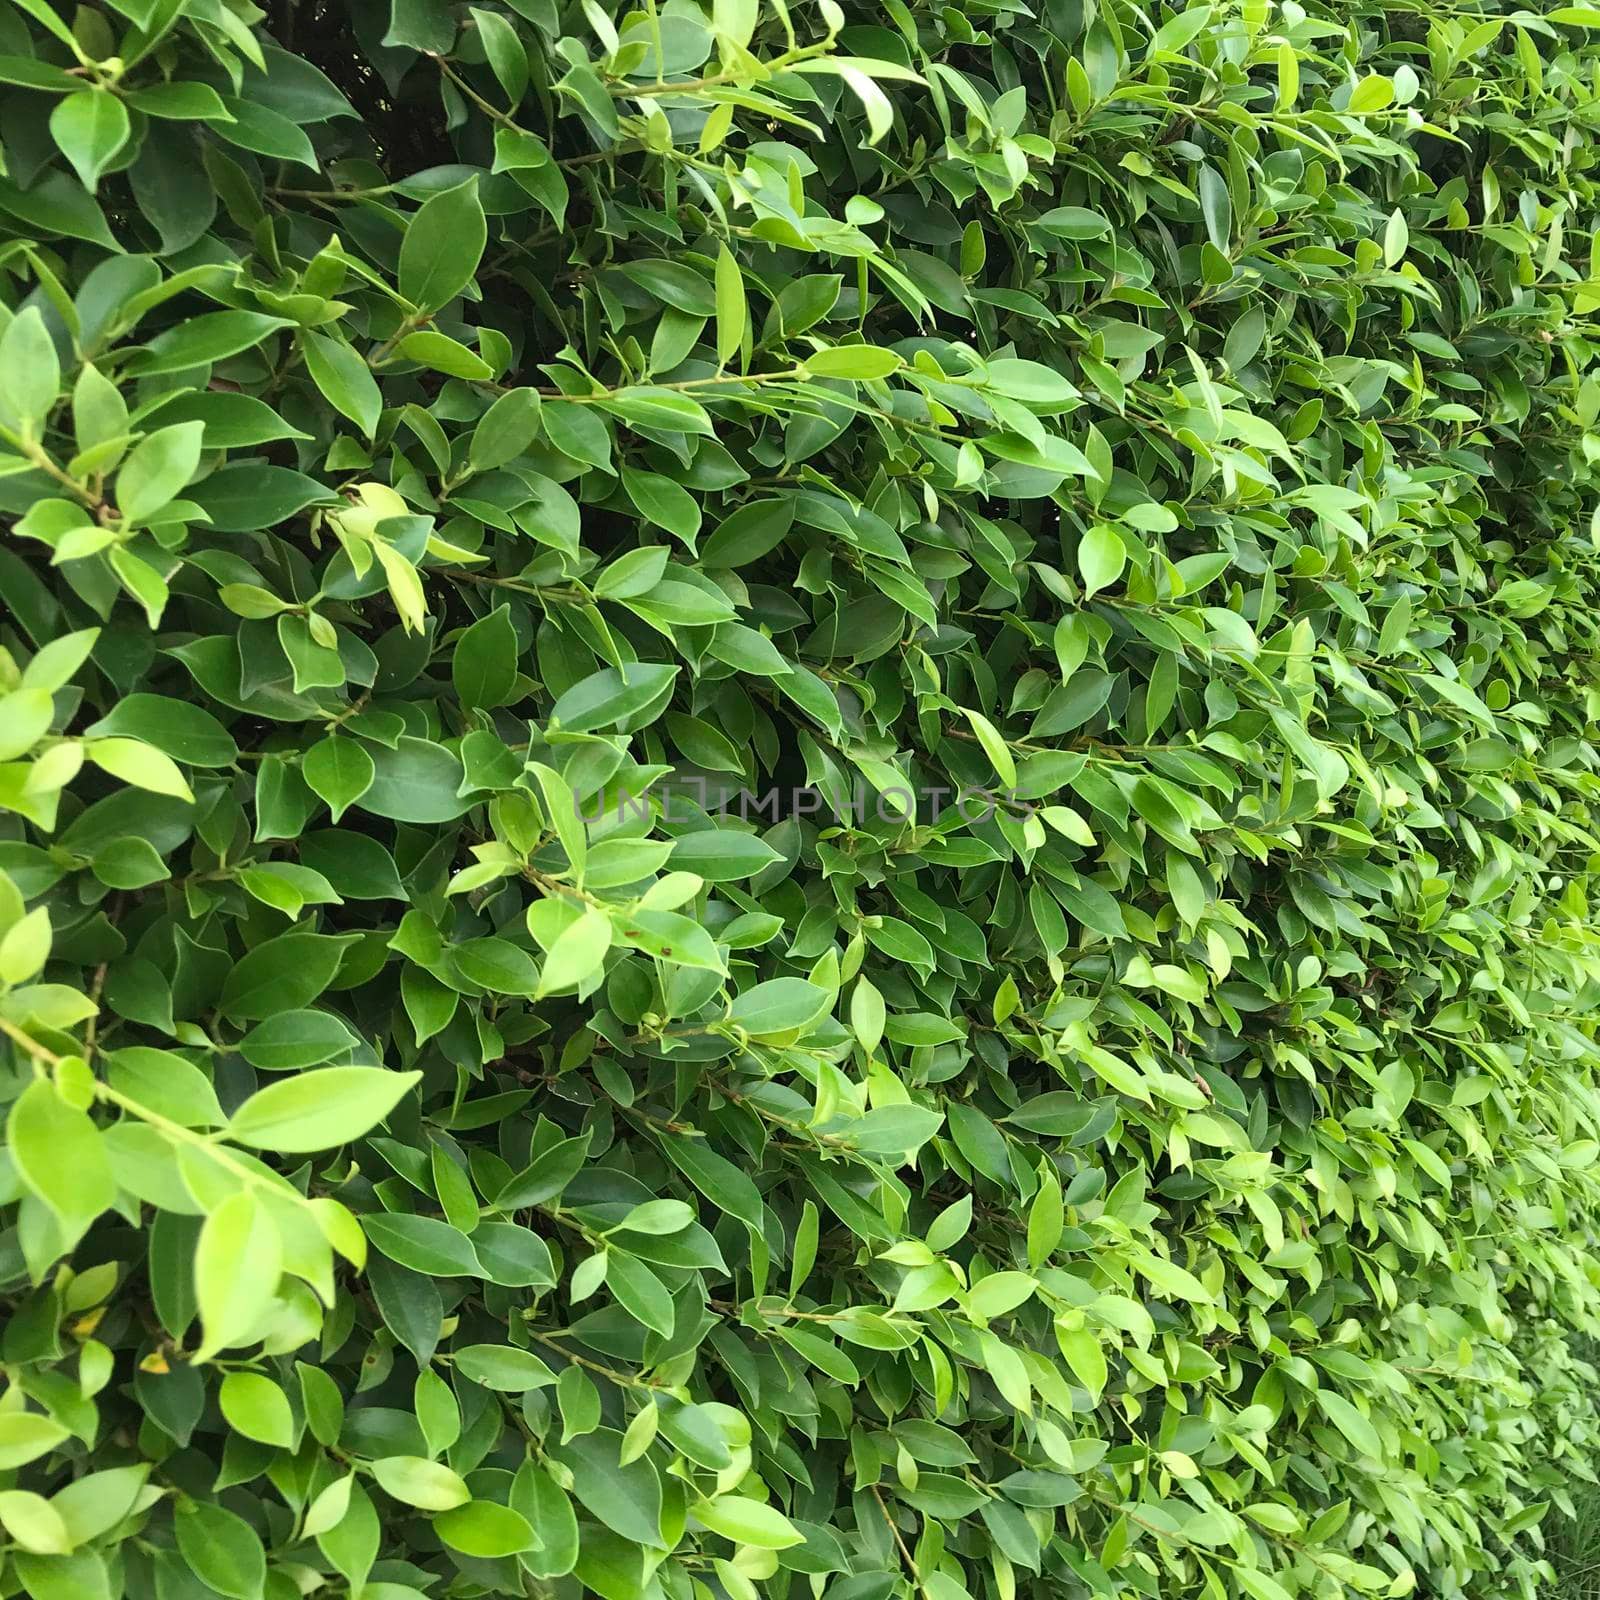 A wall or fence made of green leafy plants, nature textured background.